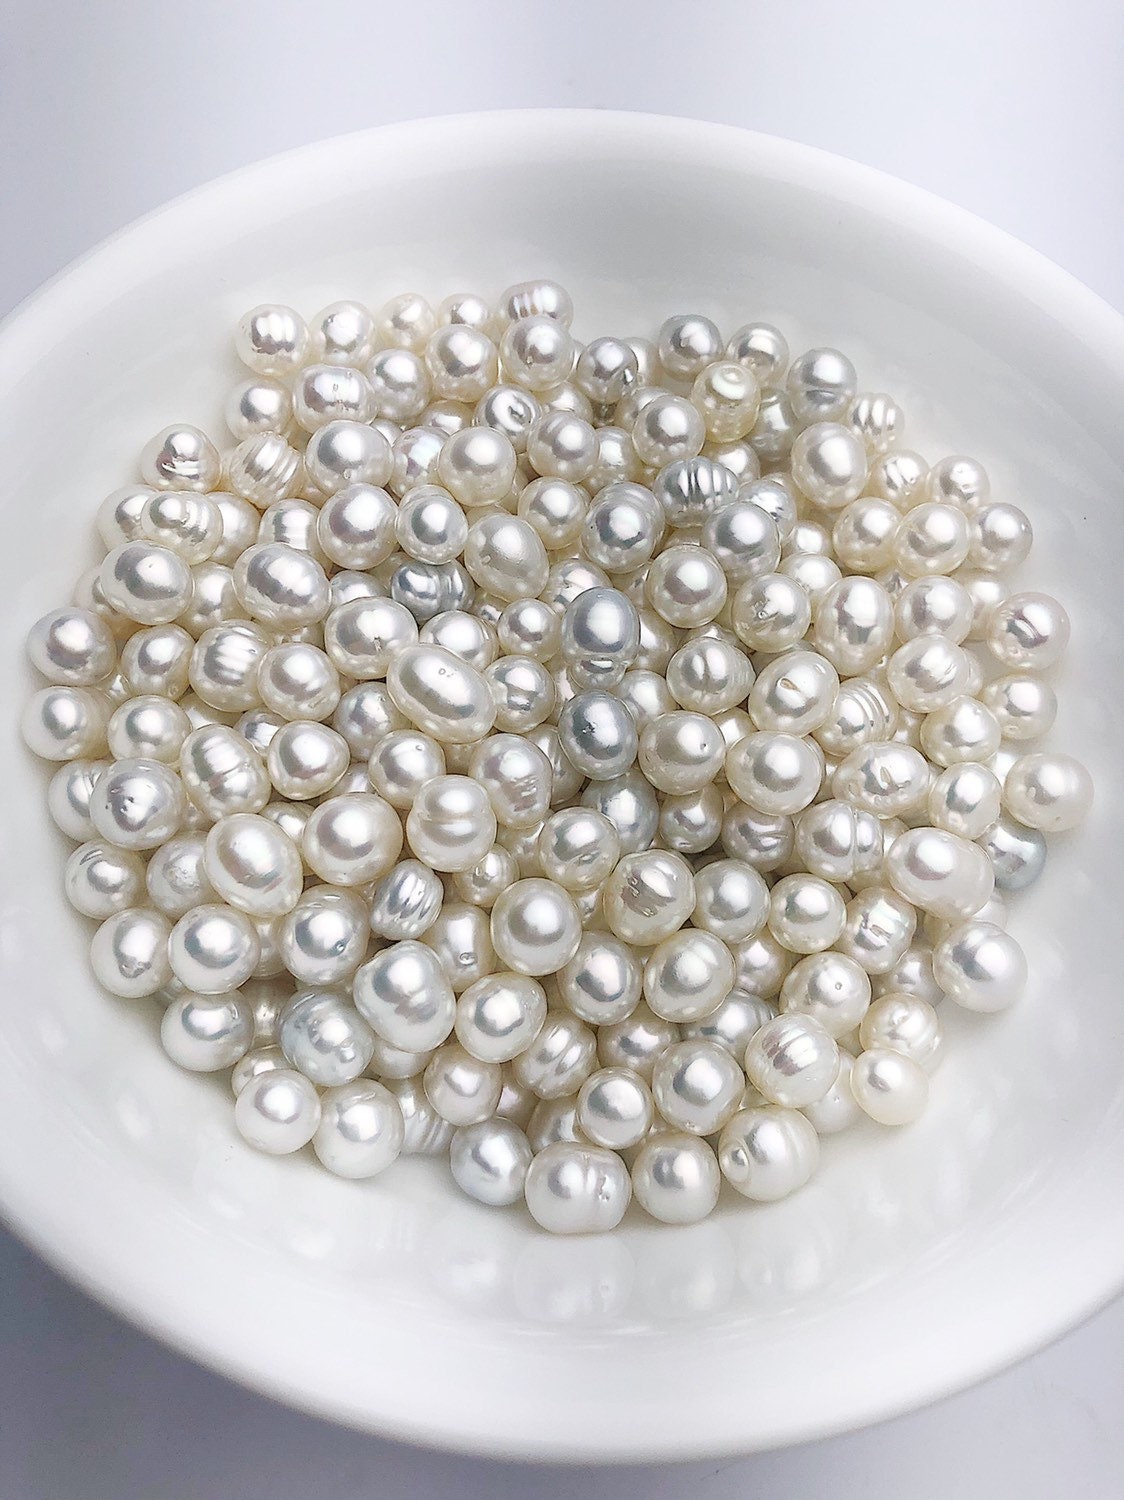 White South Sea Loose Pearls, Australia, Drops/Ovals, 9mm, AA Quality